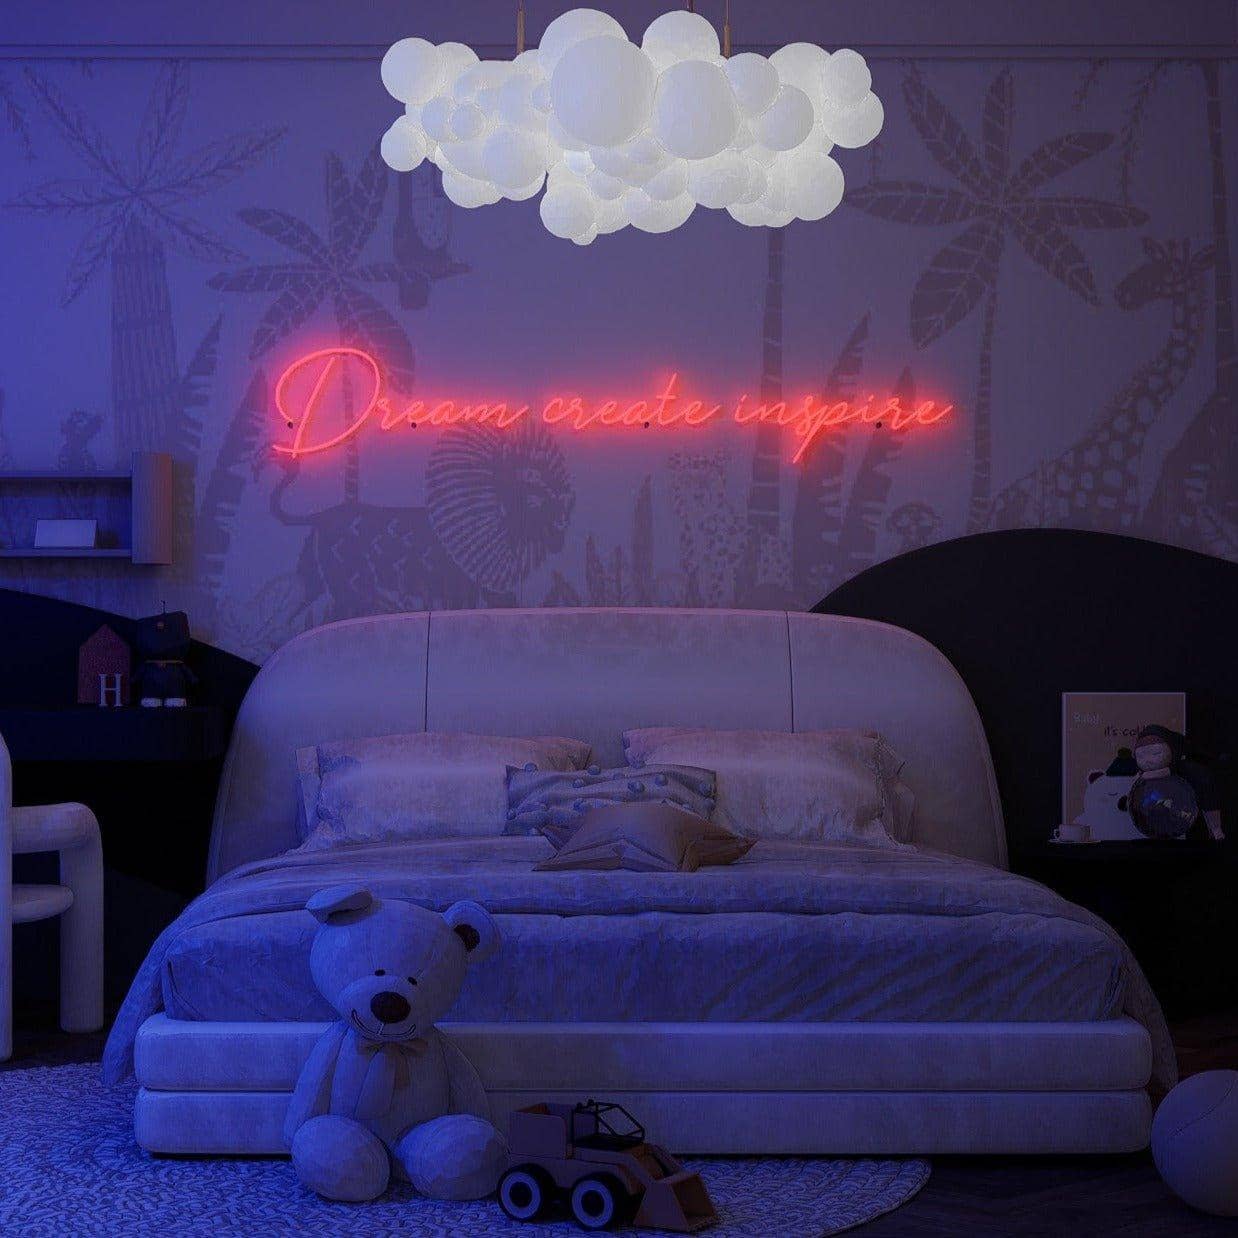 red-neon-lights-are-lit-up-and-displayed-in-the-bedroom-at-night-dream-creat-inspire